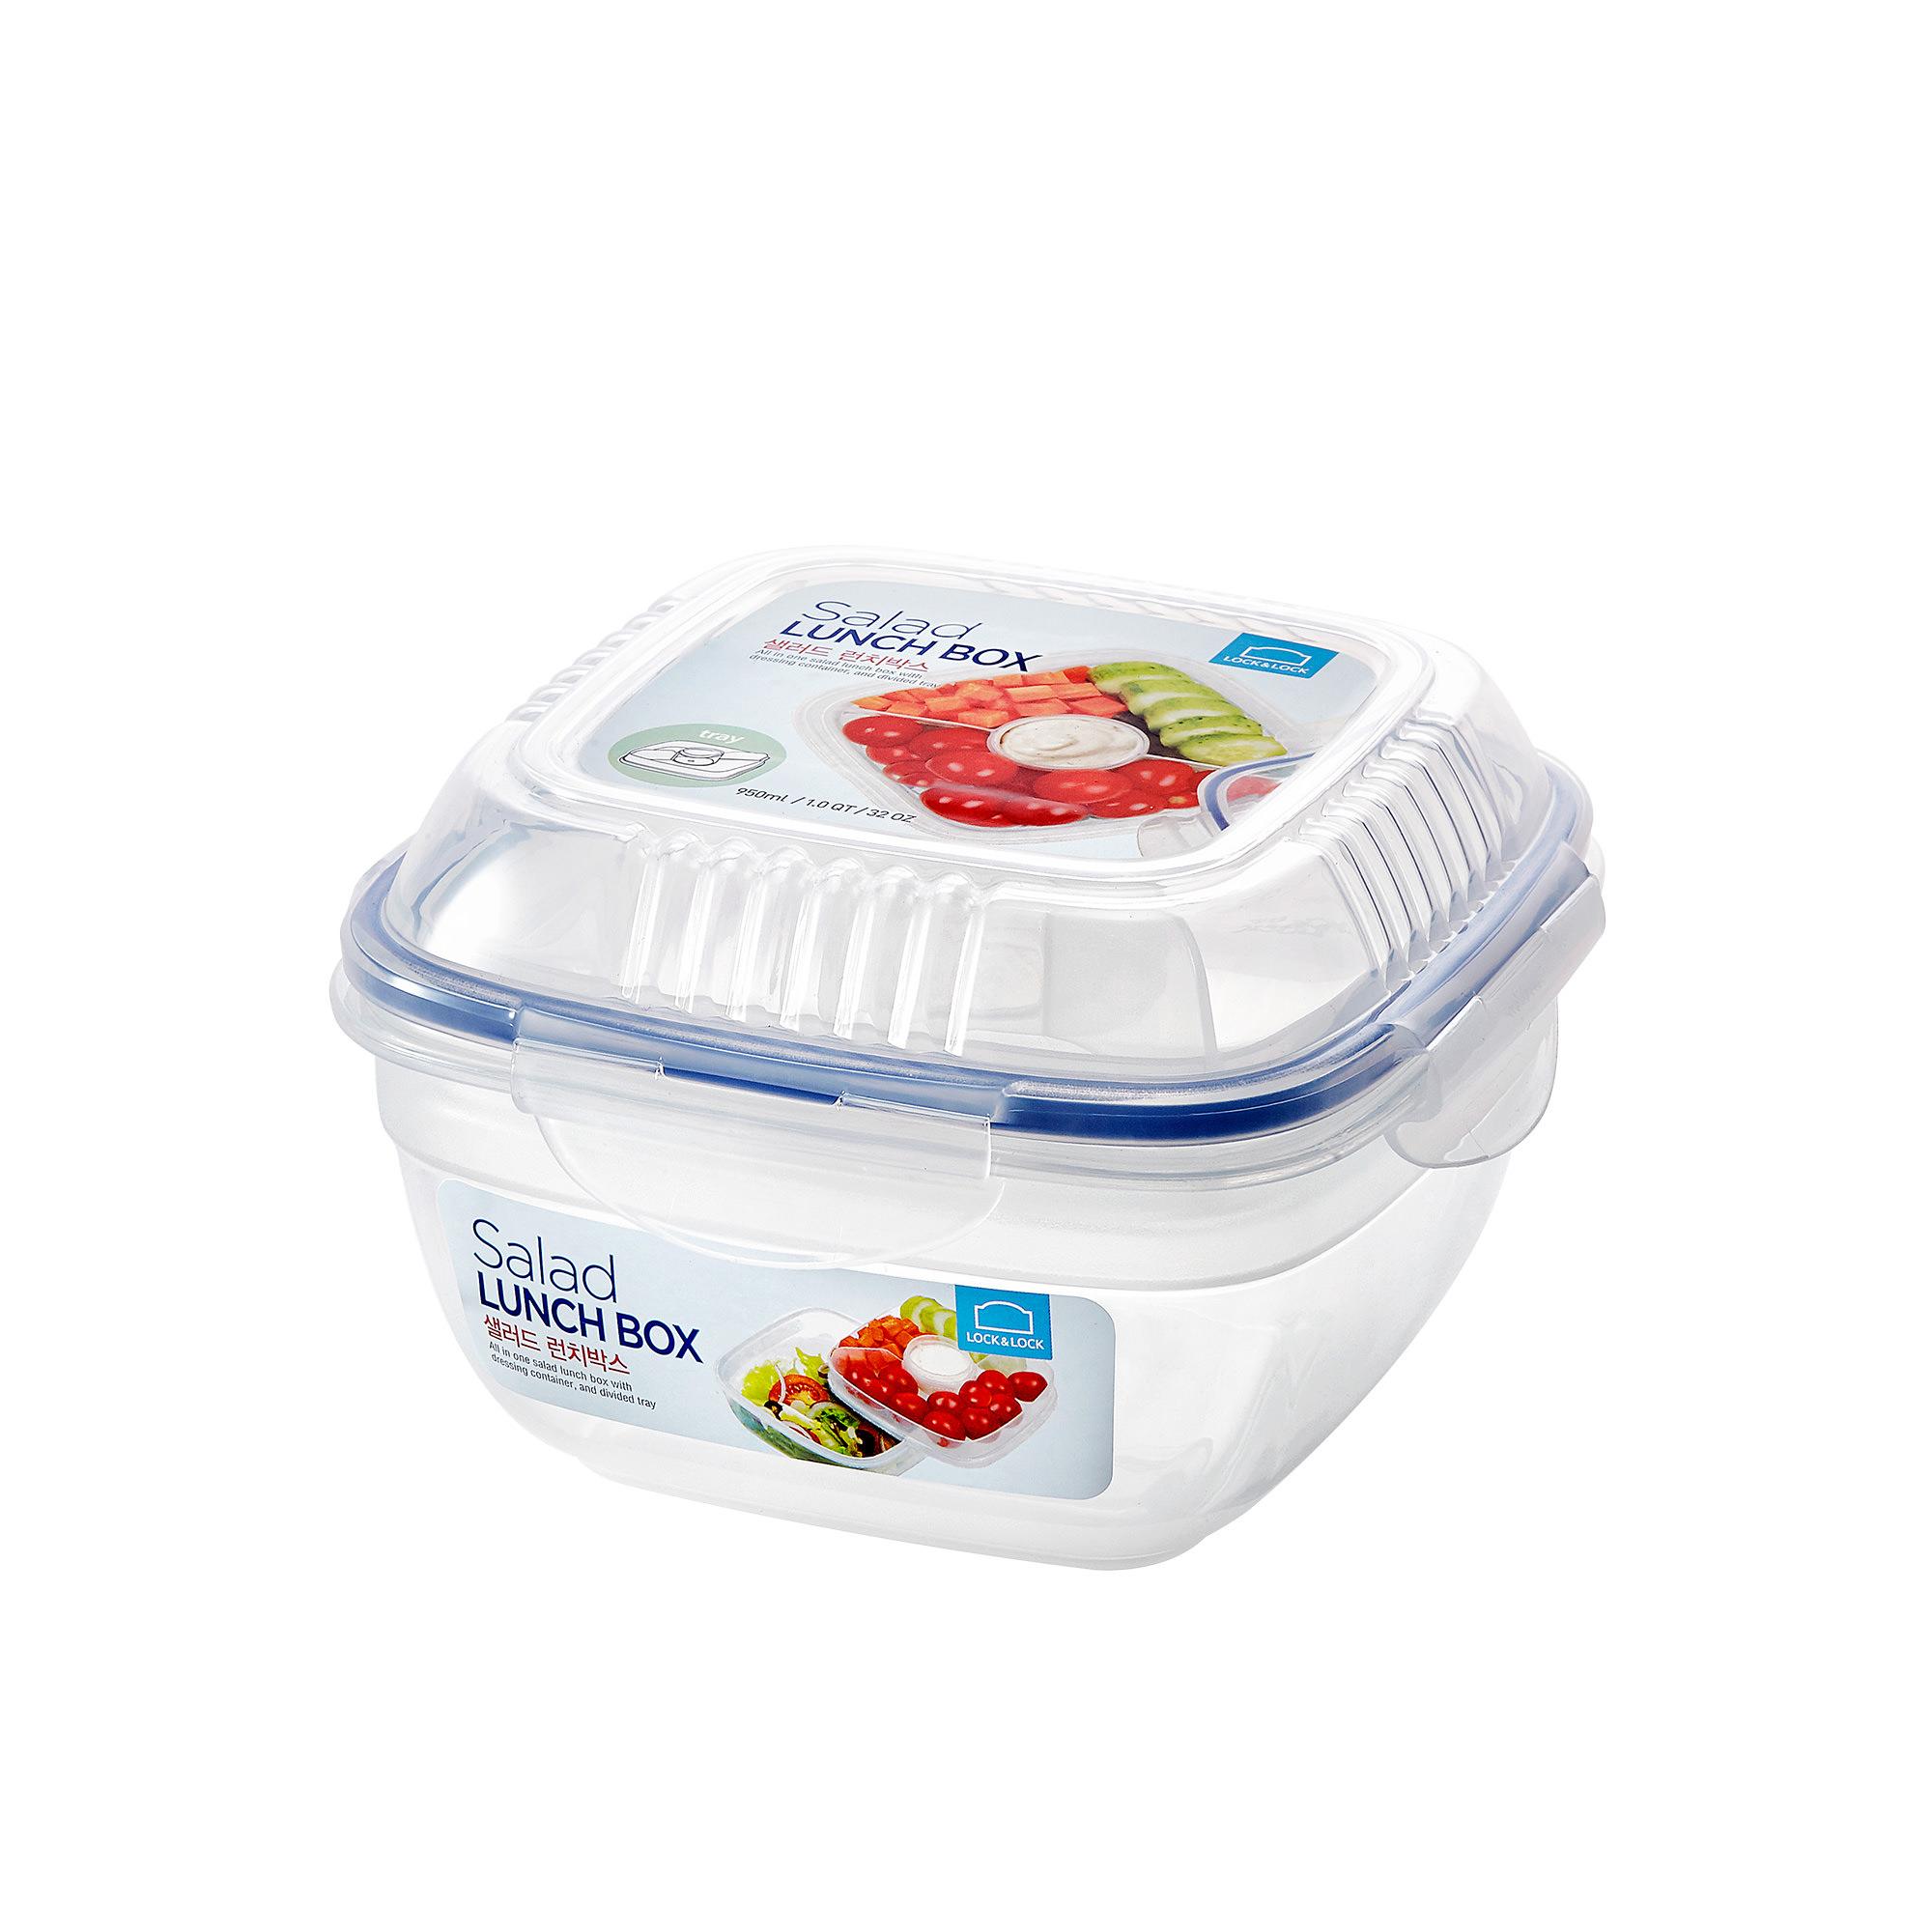 Lock & Lock Special Salad Lunch Box with Dividers 950ml Image 1